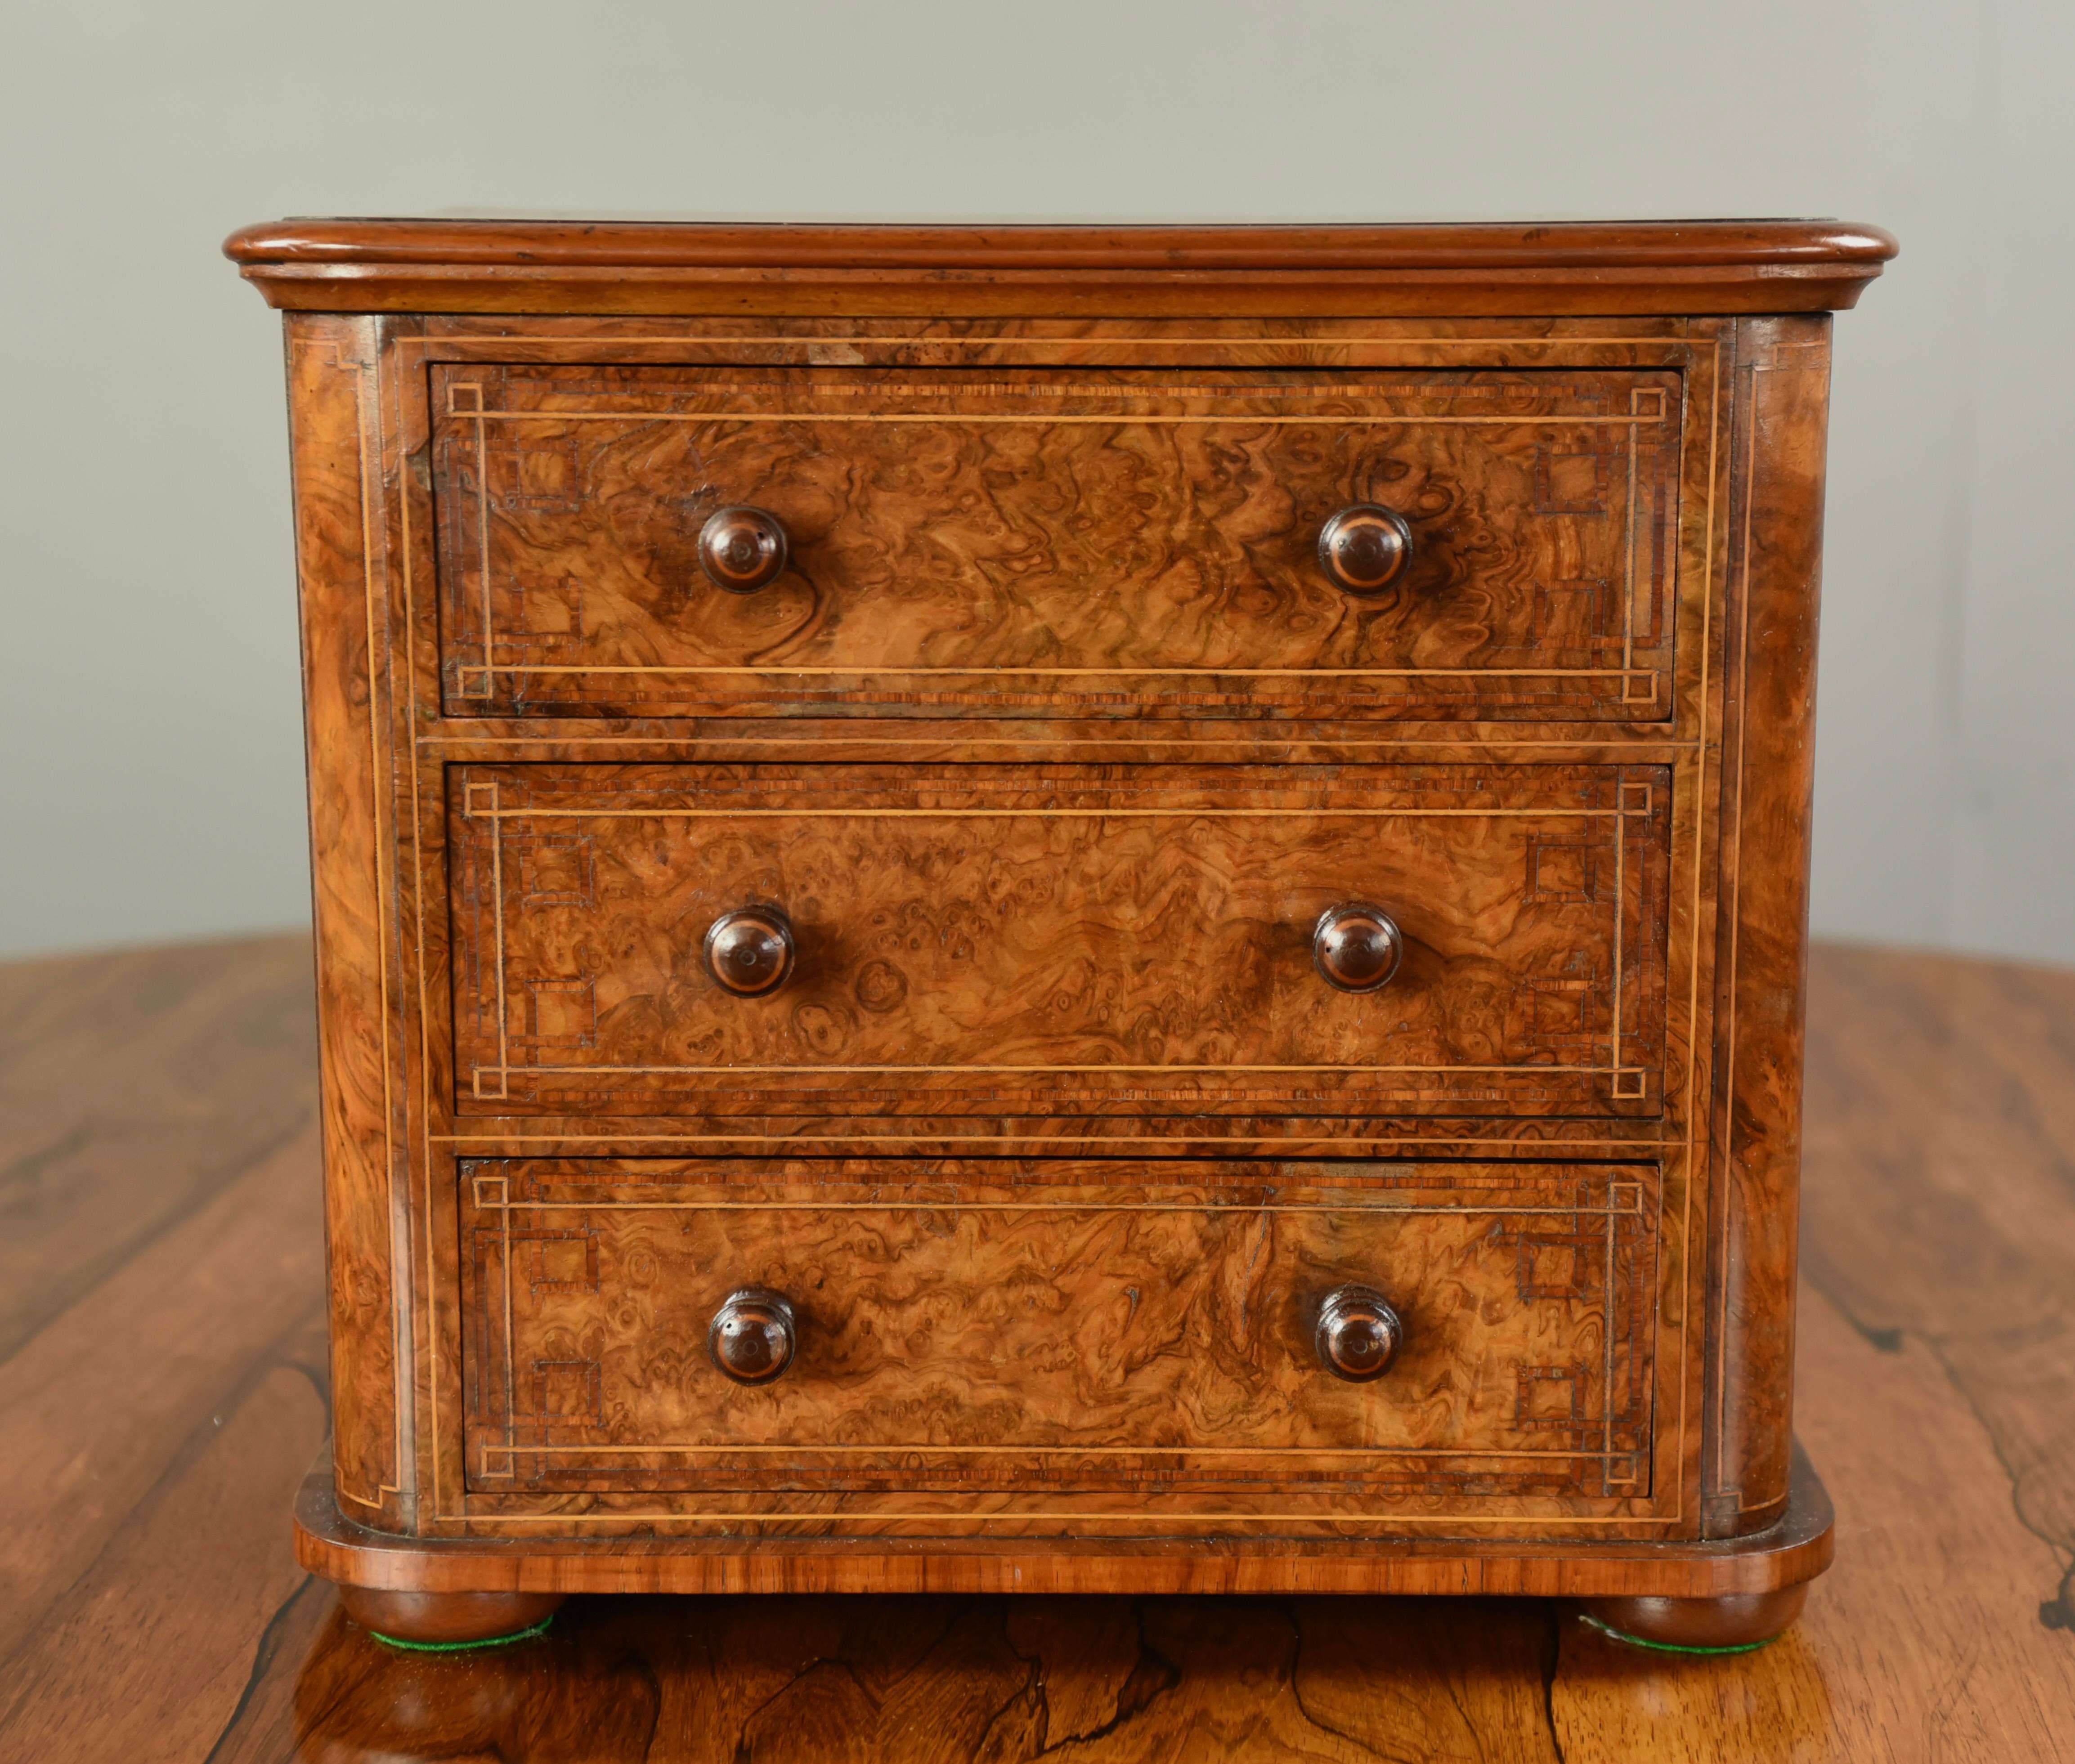 Fine quality mid 19th Century Victorian antique burr walnut table top chest of drawers that has three graduating mahogany lined drawers with fine turned walnut knob handles. It stands on bun feet. This is a very unusual small chest of good